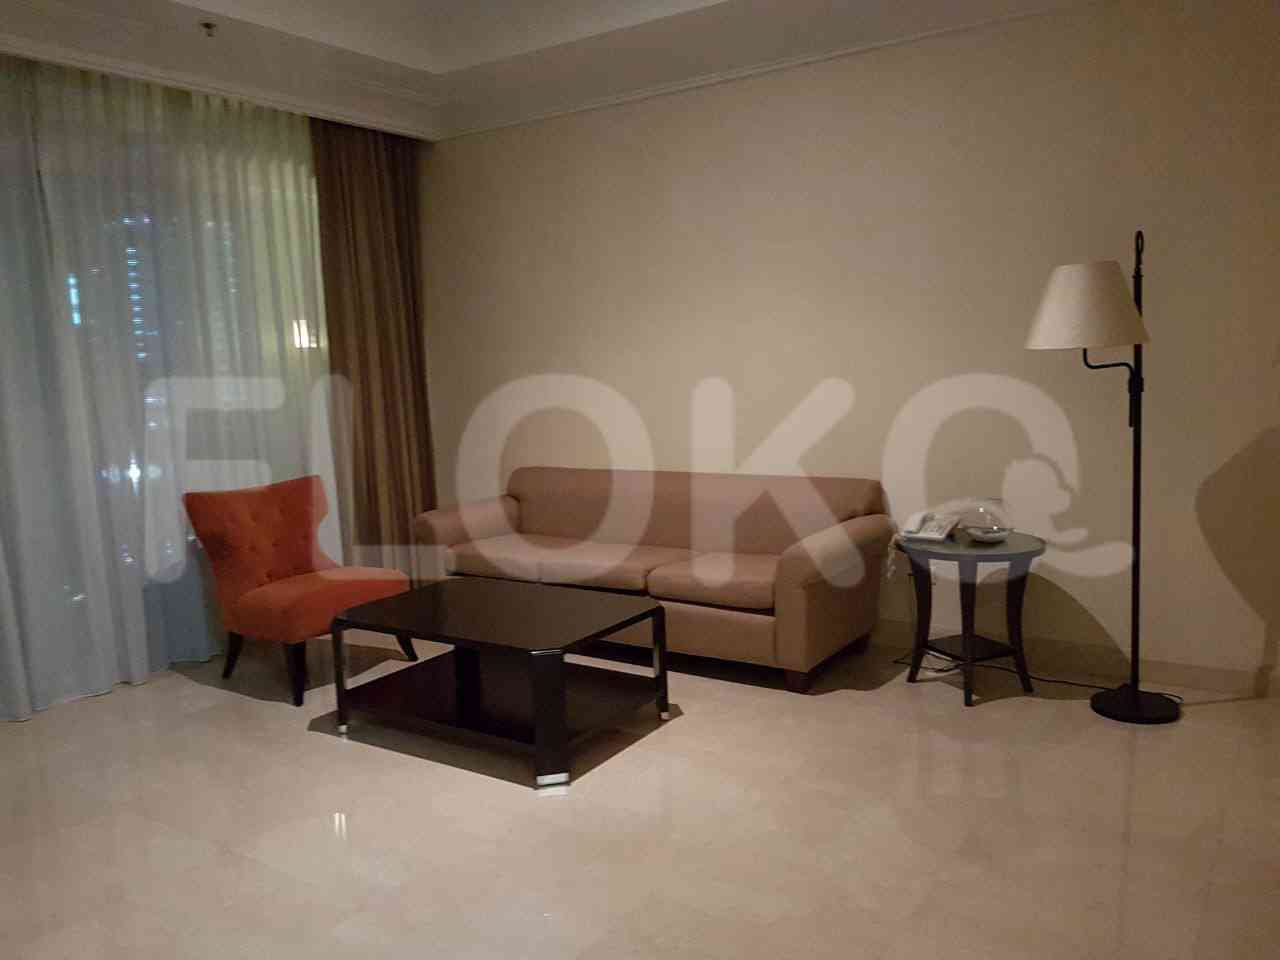 2 Bedroom on 15th Floor for Rent in Pakubuwono View - fga252 1